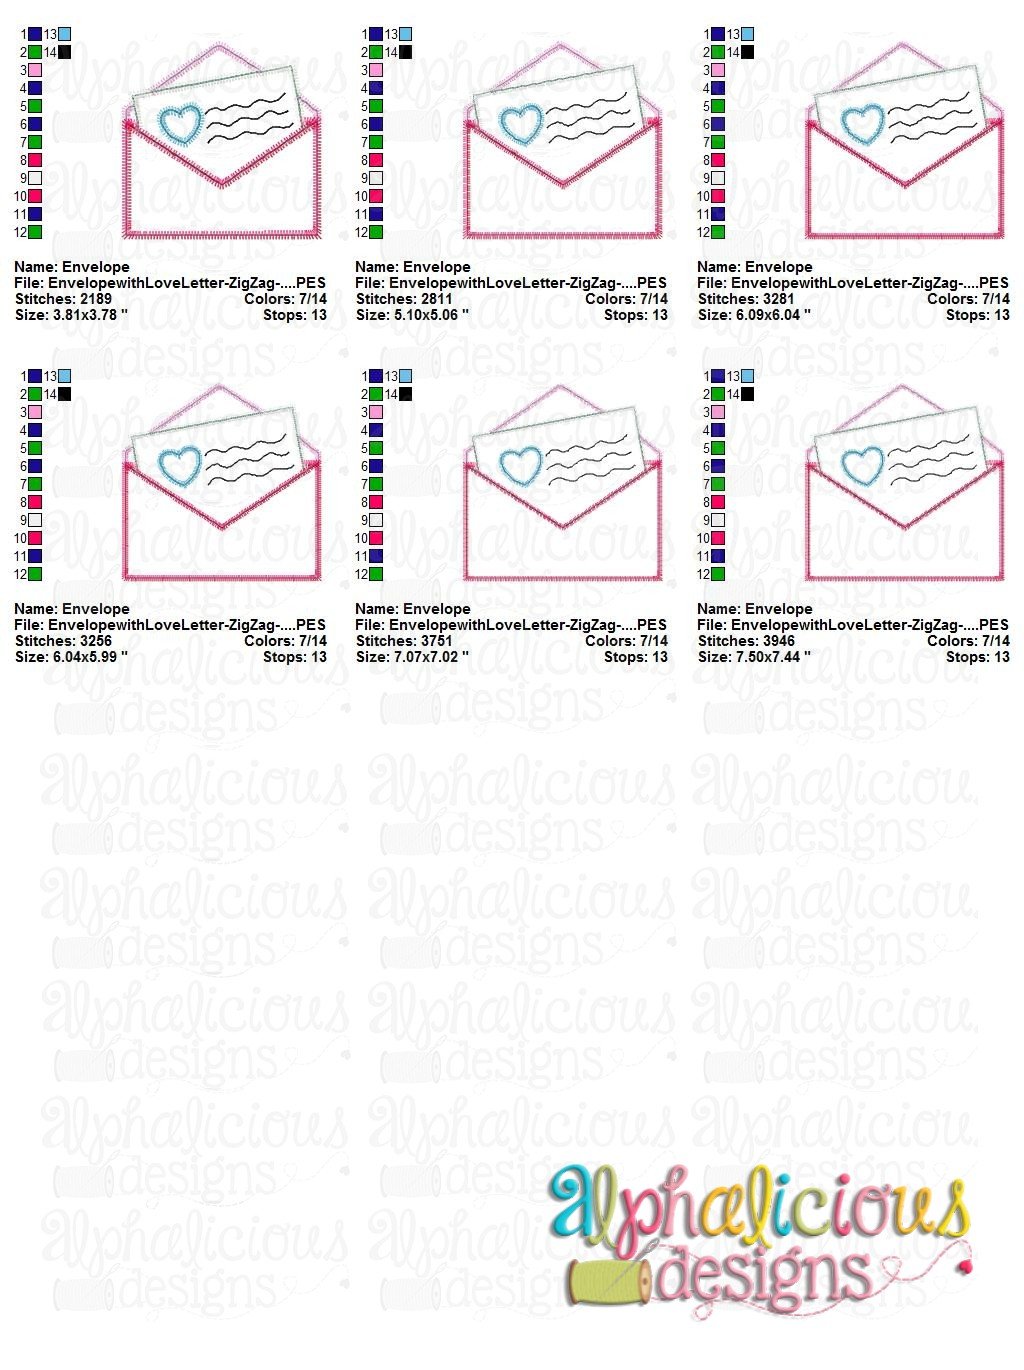 Envelope with Love Letter- ZigZag